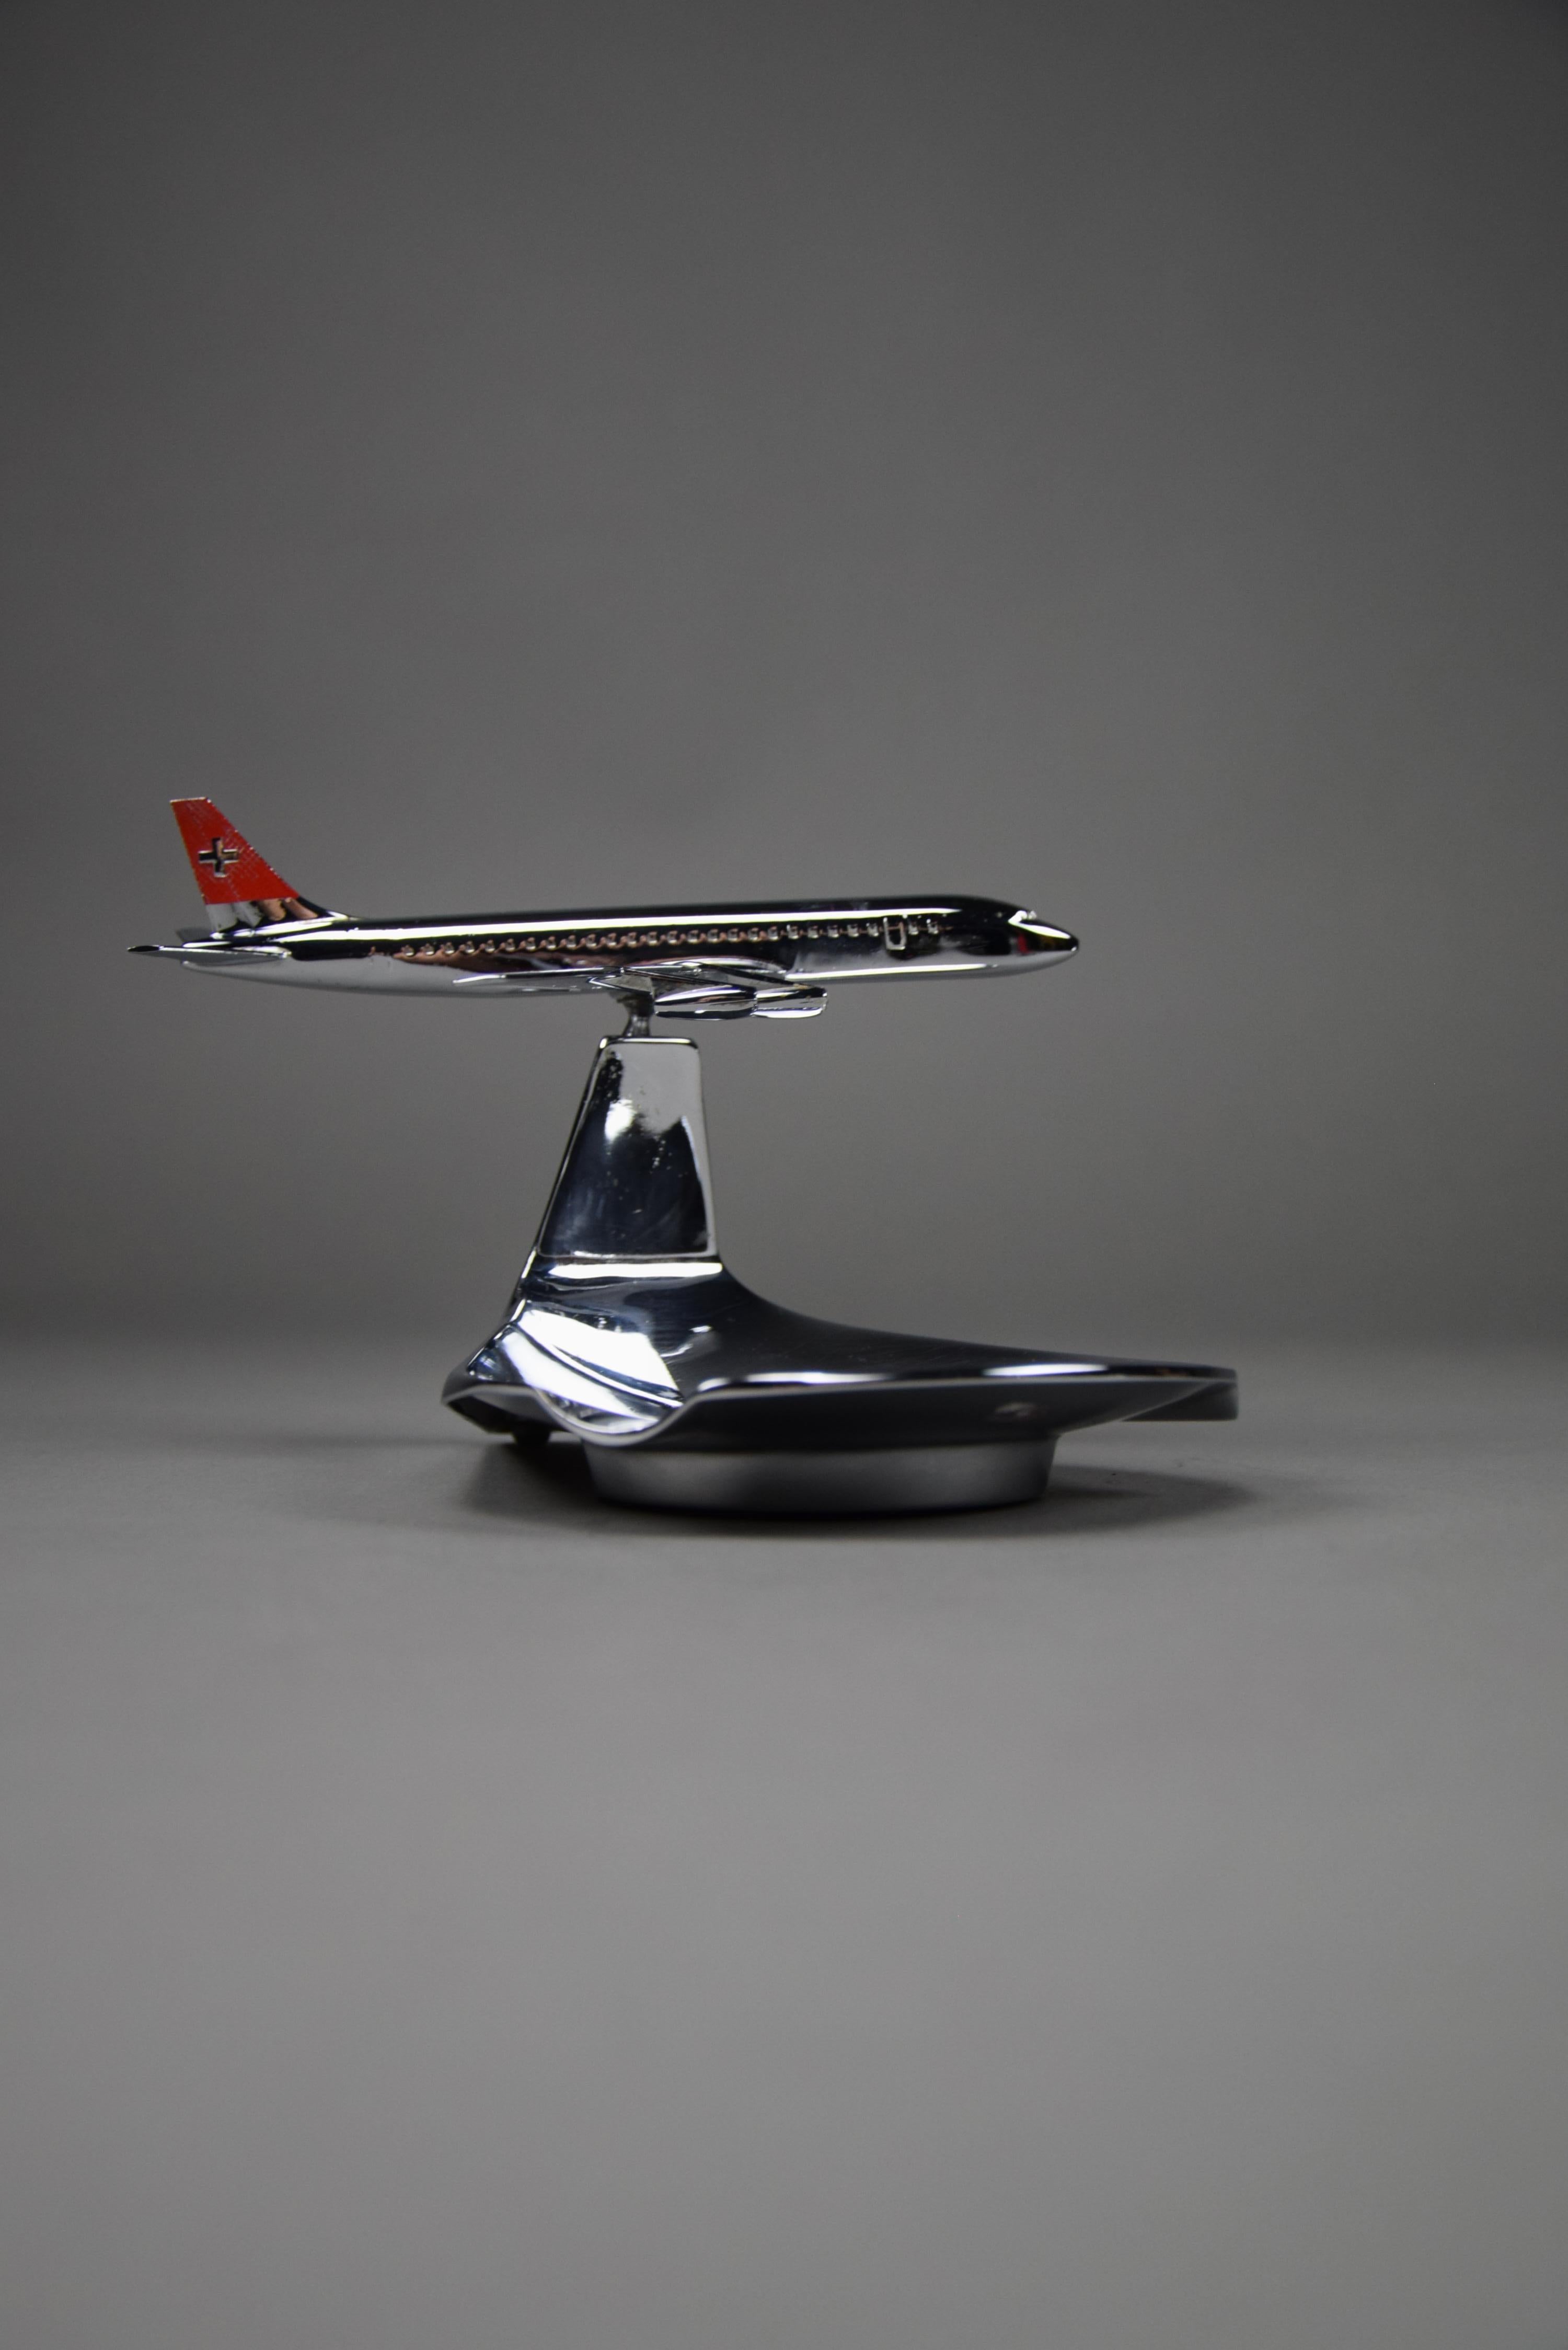 Introducing a Collector's Dream: Rare 1960s Swiss Air Chrome-Plated Ashtray with a DC8 Airplane Model!

Are you ready to own a piece of aviation history that's not just functional but also a striking work of art? Feast your eyes on the rare 1960s